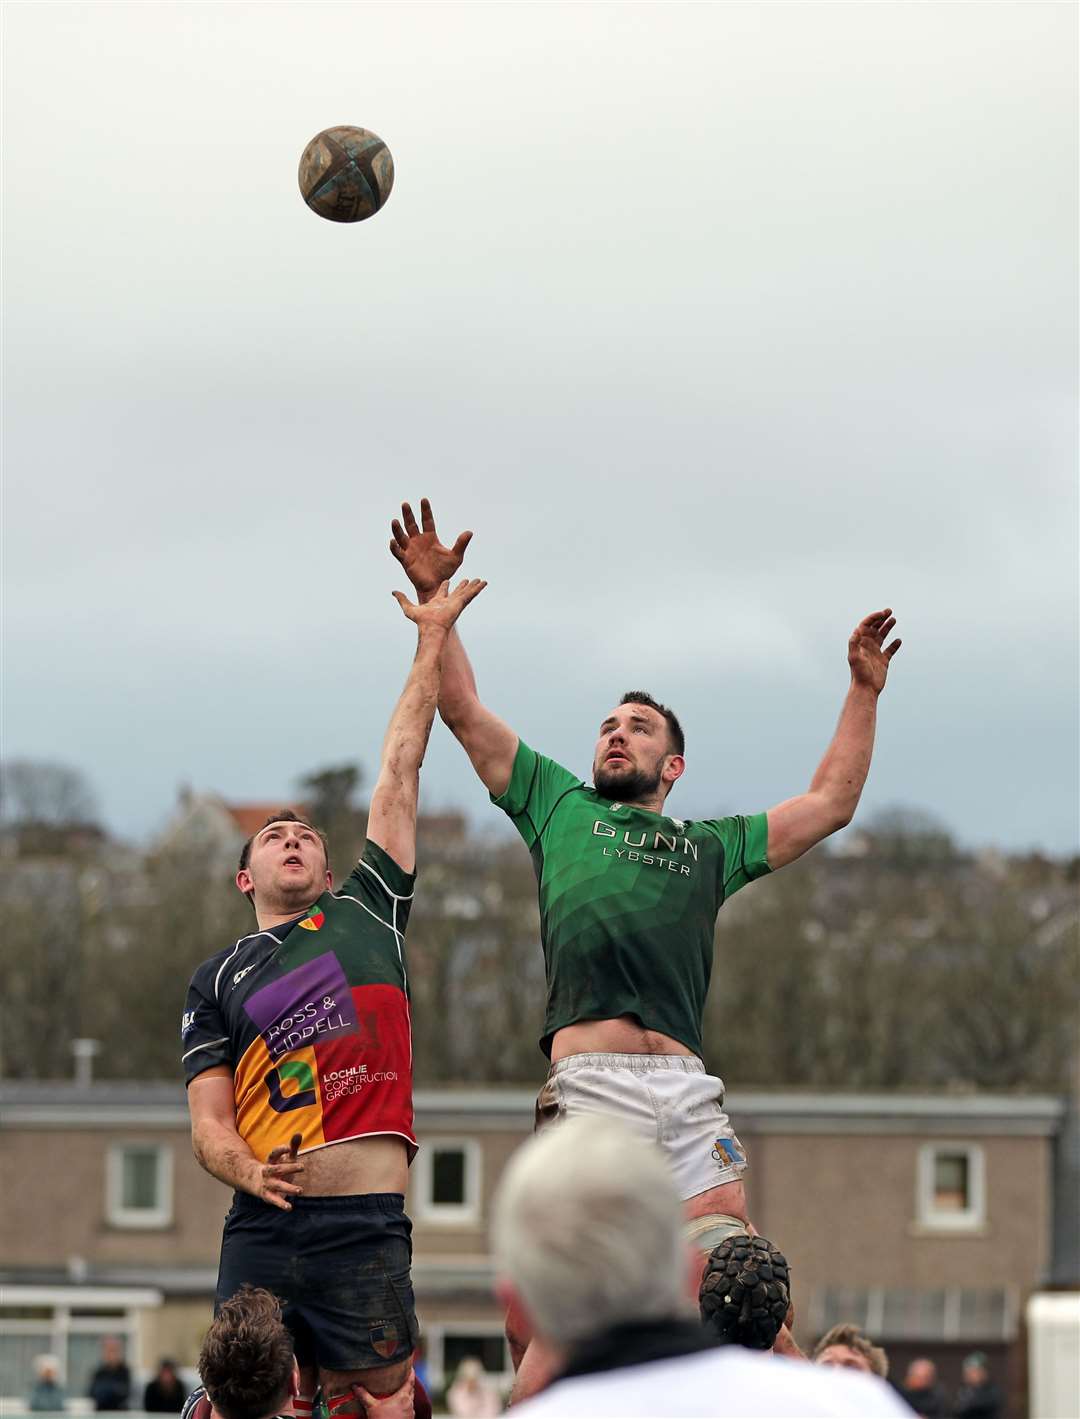 Marc Mackenzie jumps in the lineout during the Greens' defeat to Hillhead Jordanhill at Millbank on Saturday. Picture: James Gunn